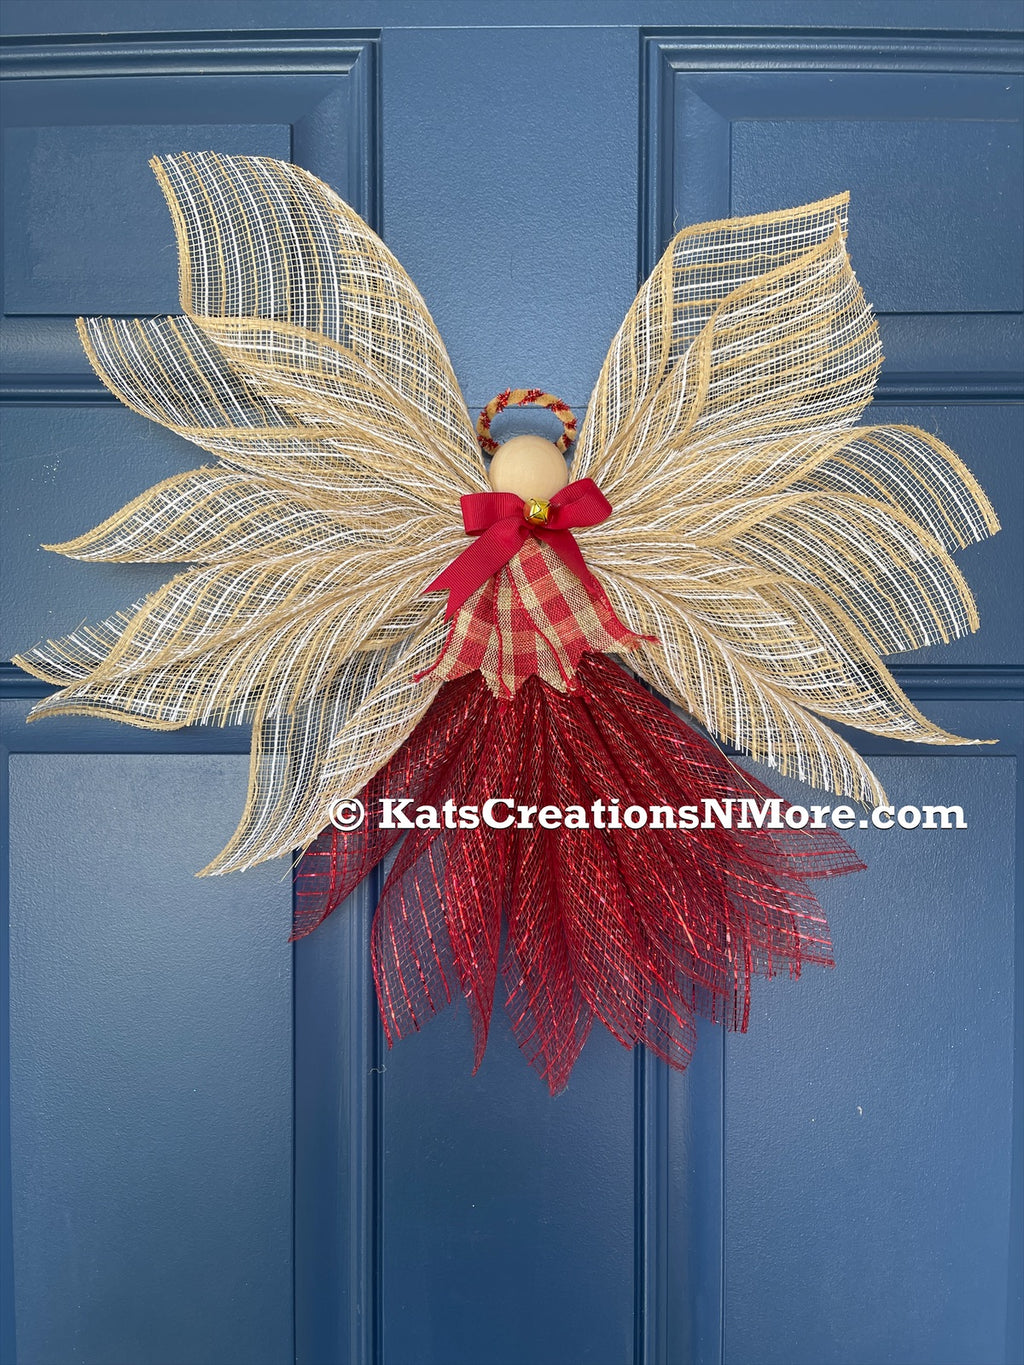 Rustic Farmhouse Jute Burlap and Red Metallic Angel Tree Topper with Red and Tan Plaid Apron, Red Bow, Gold Bell and Wooden Head on a Blue Door